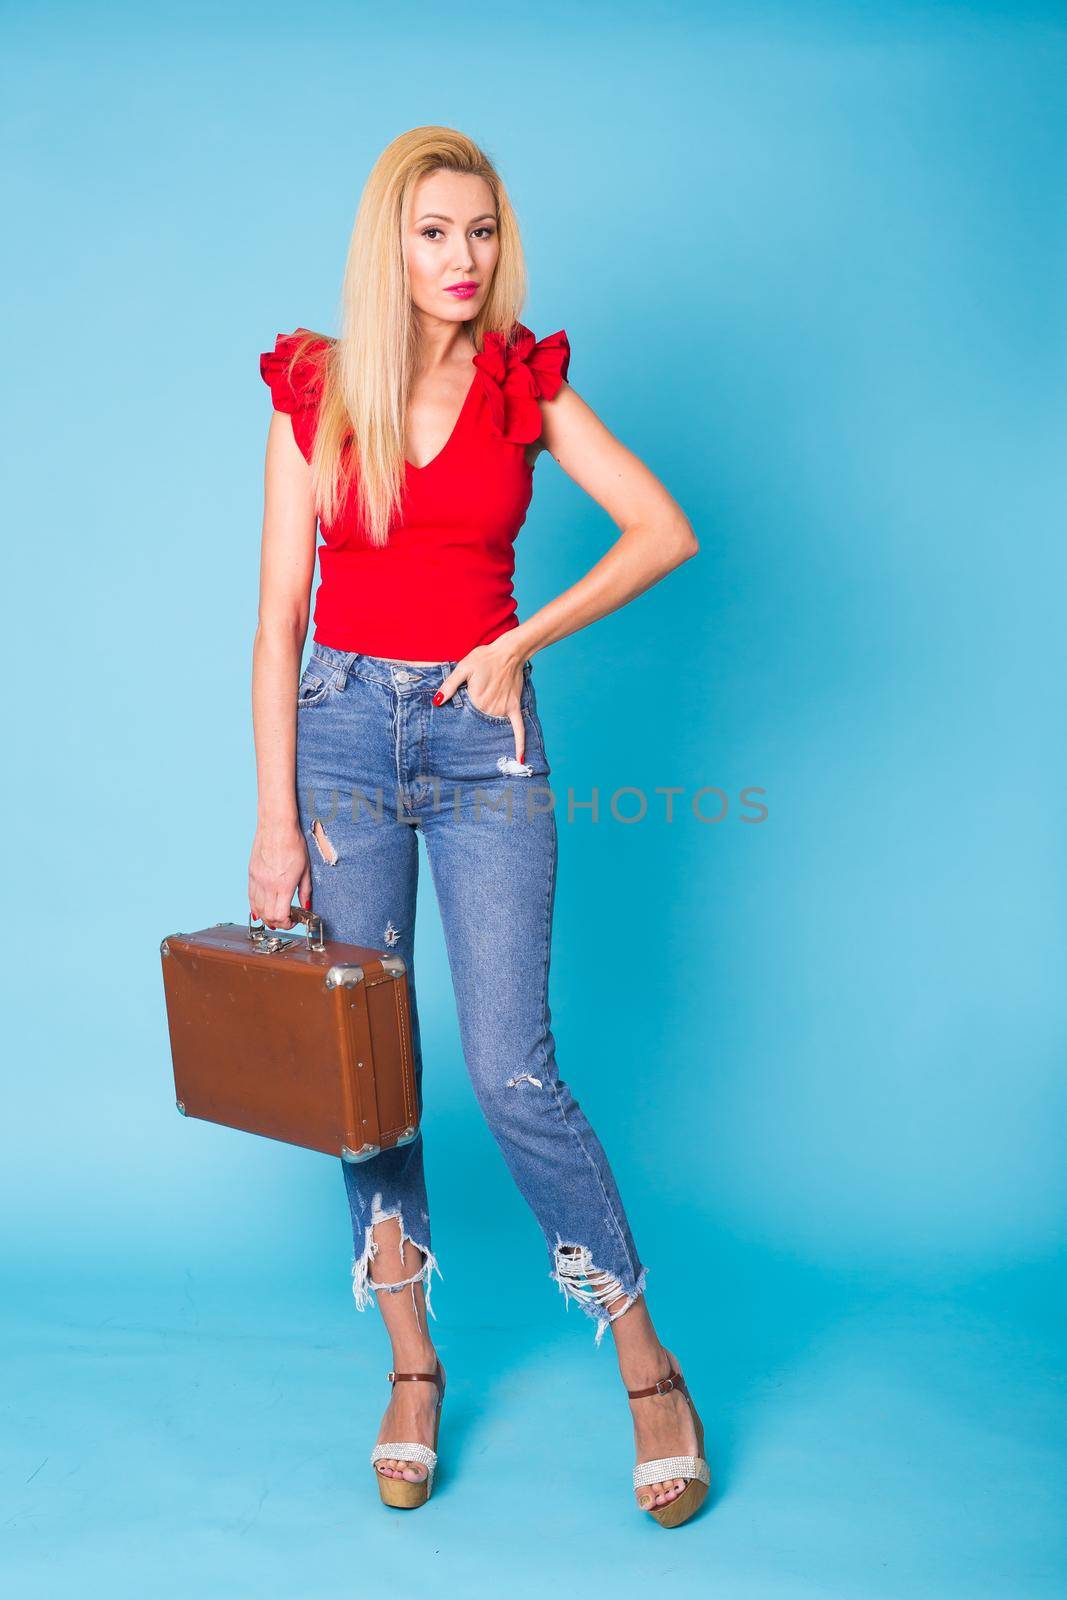 Summer, travel, people and holidays concept - fashionable young blond woman with retro suitcase isolated on blue background.